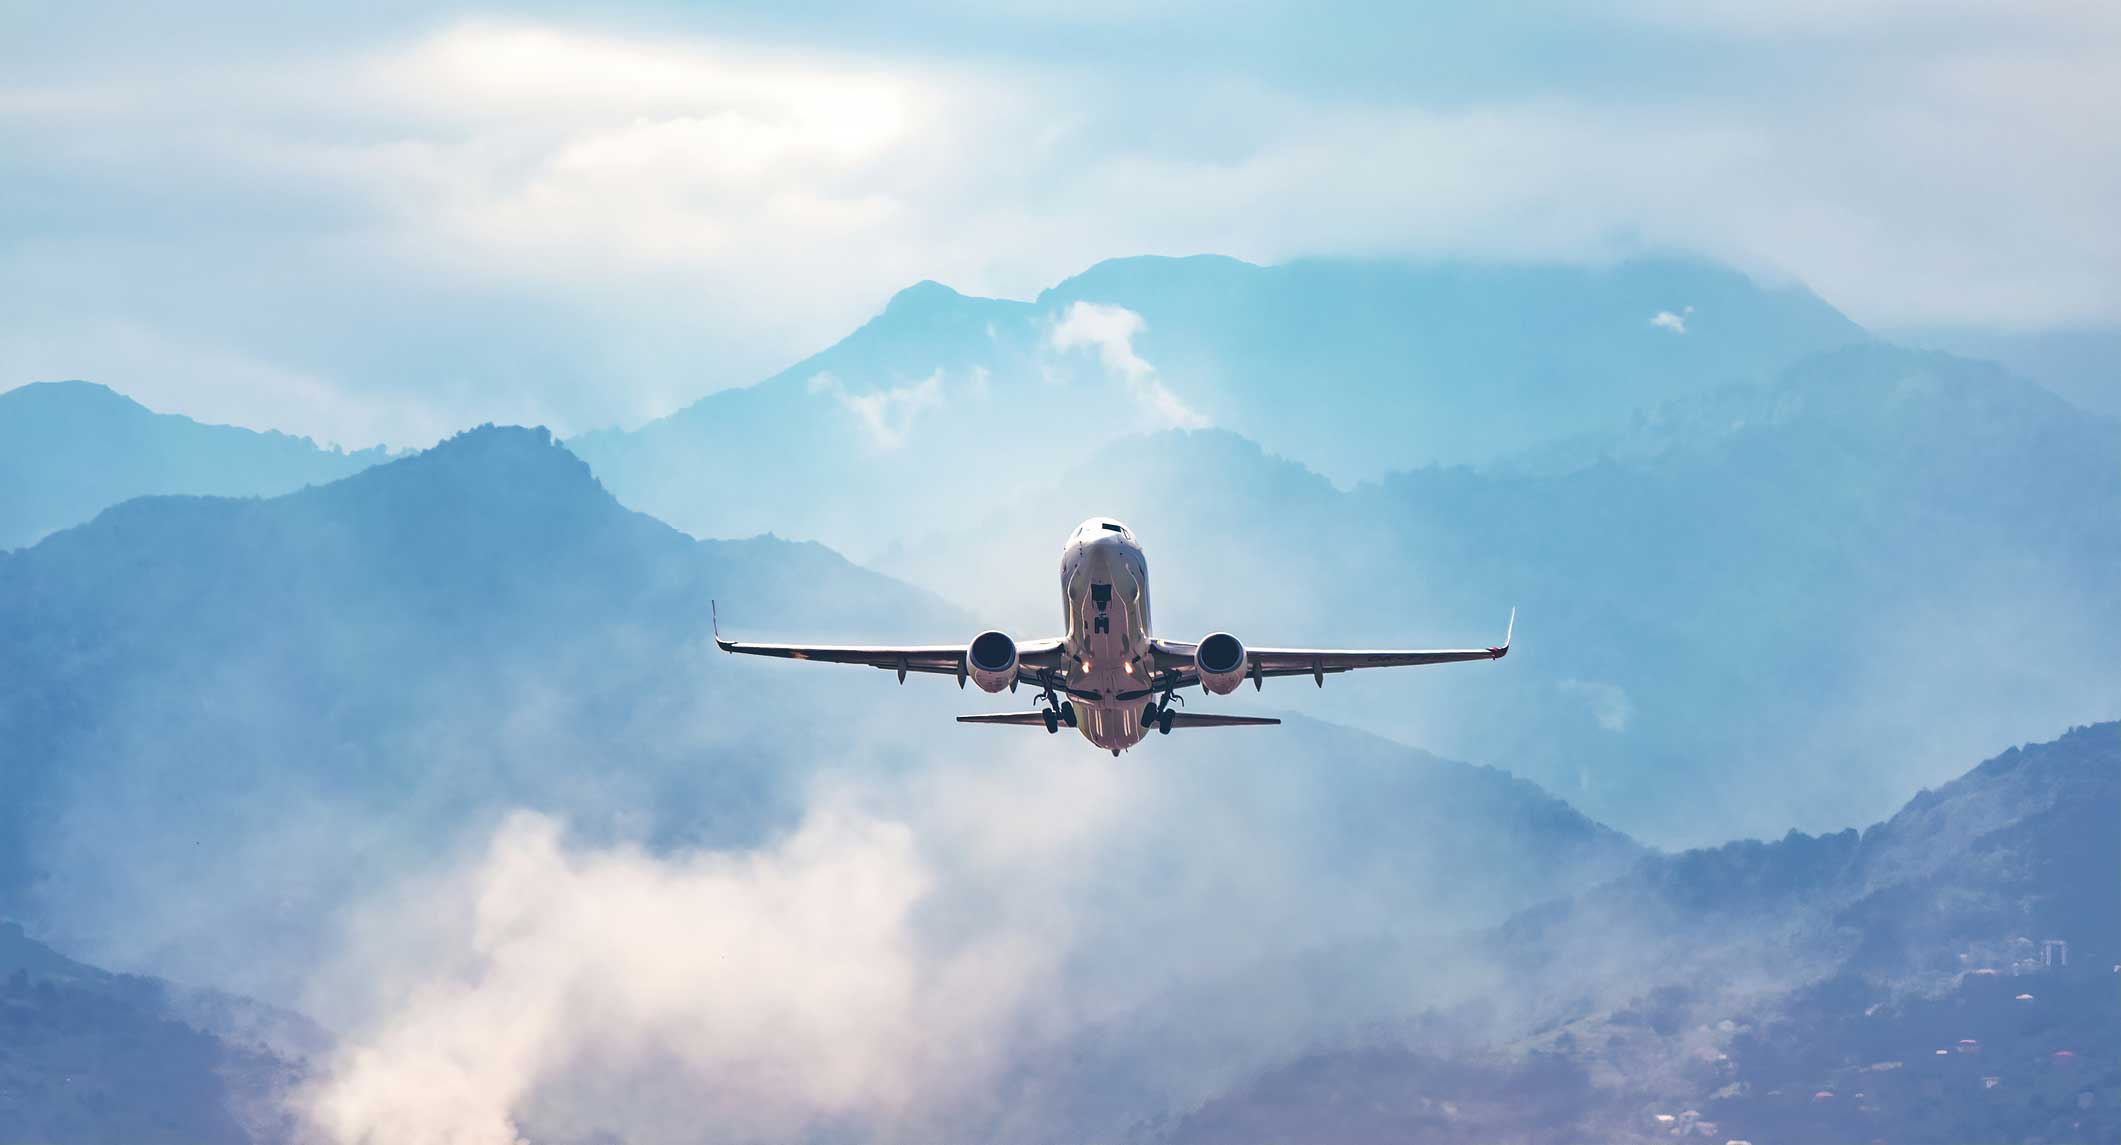 airplane taking off from the airport with mountains